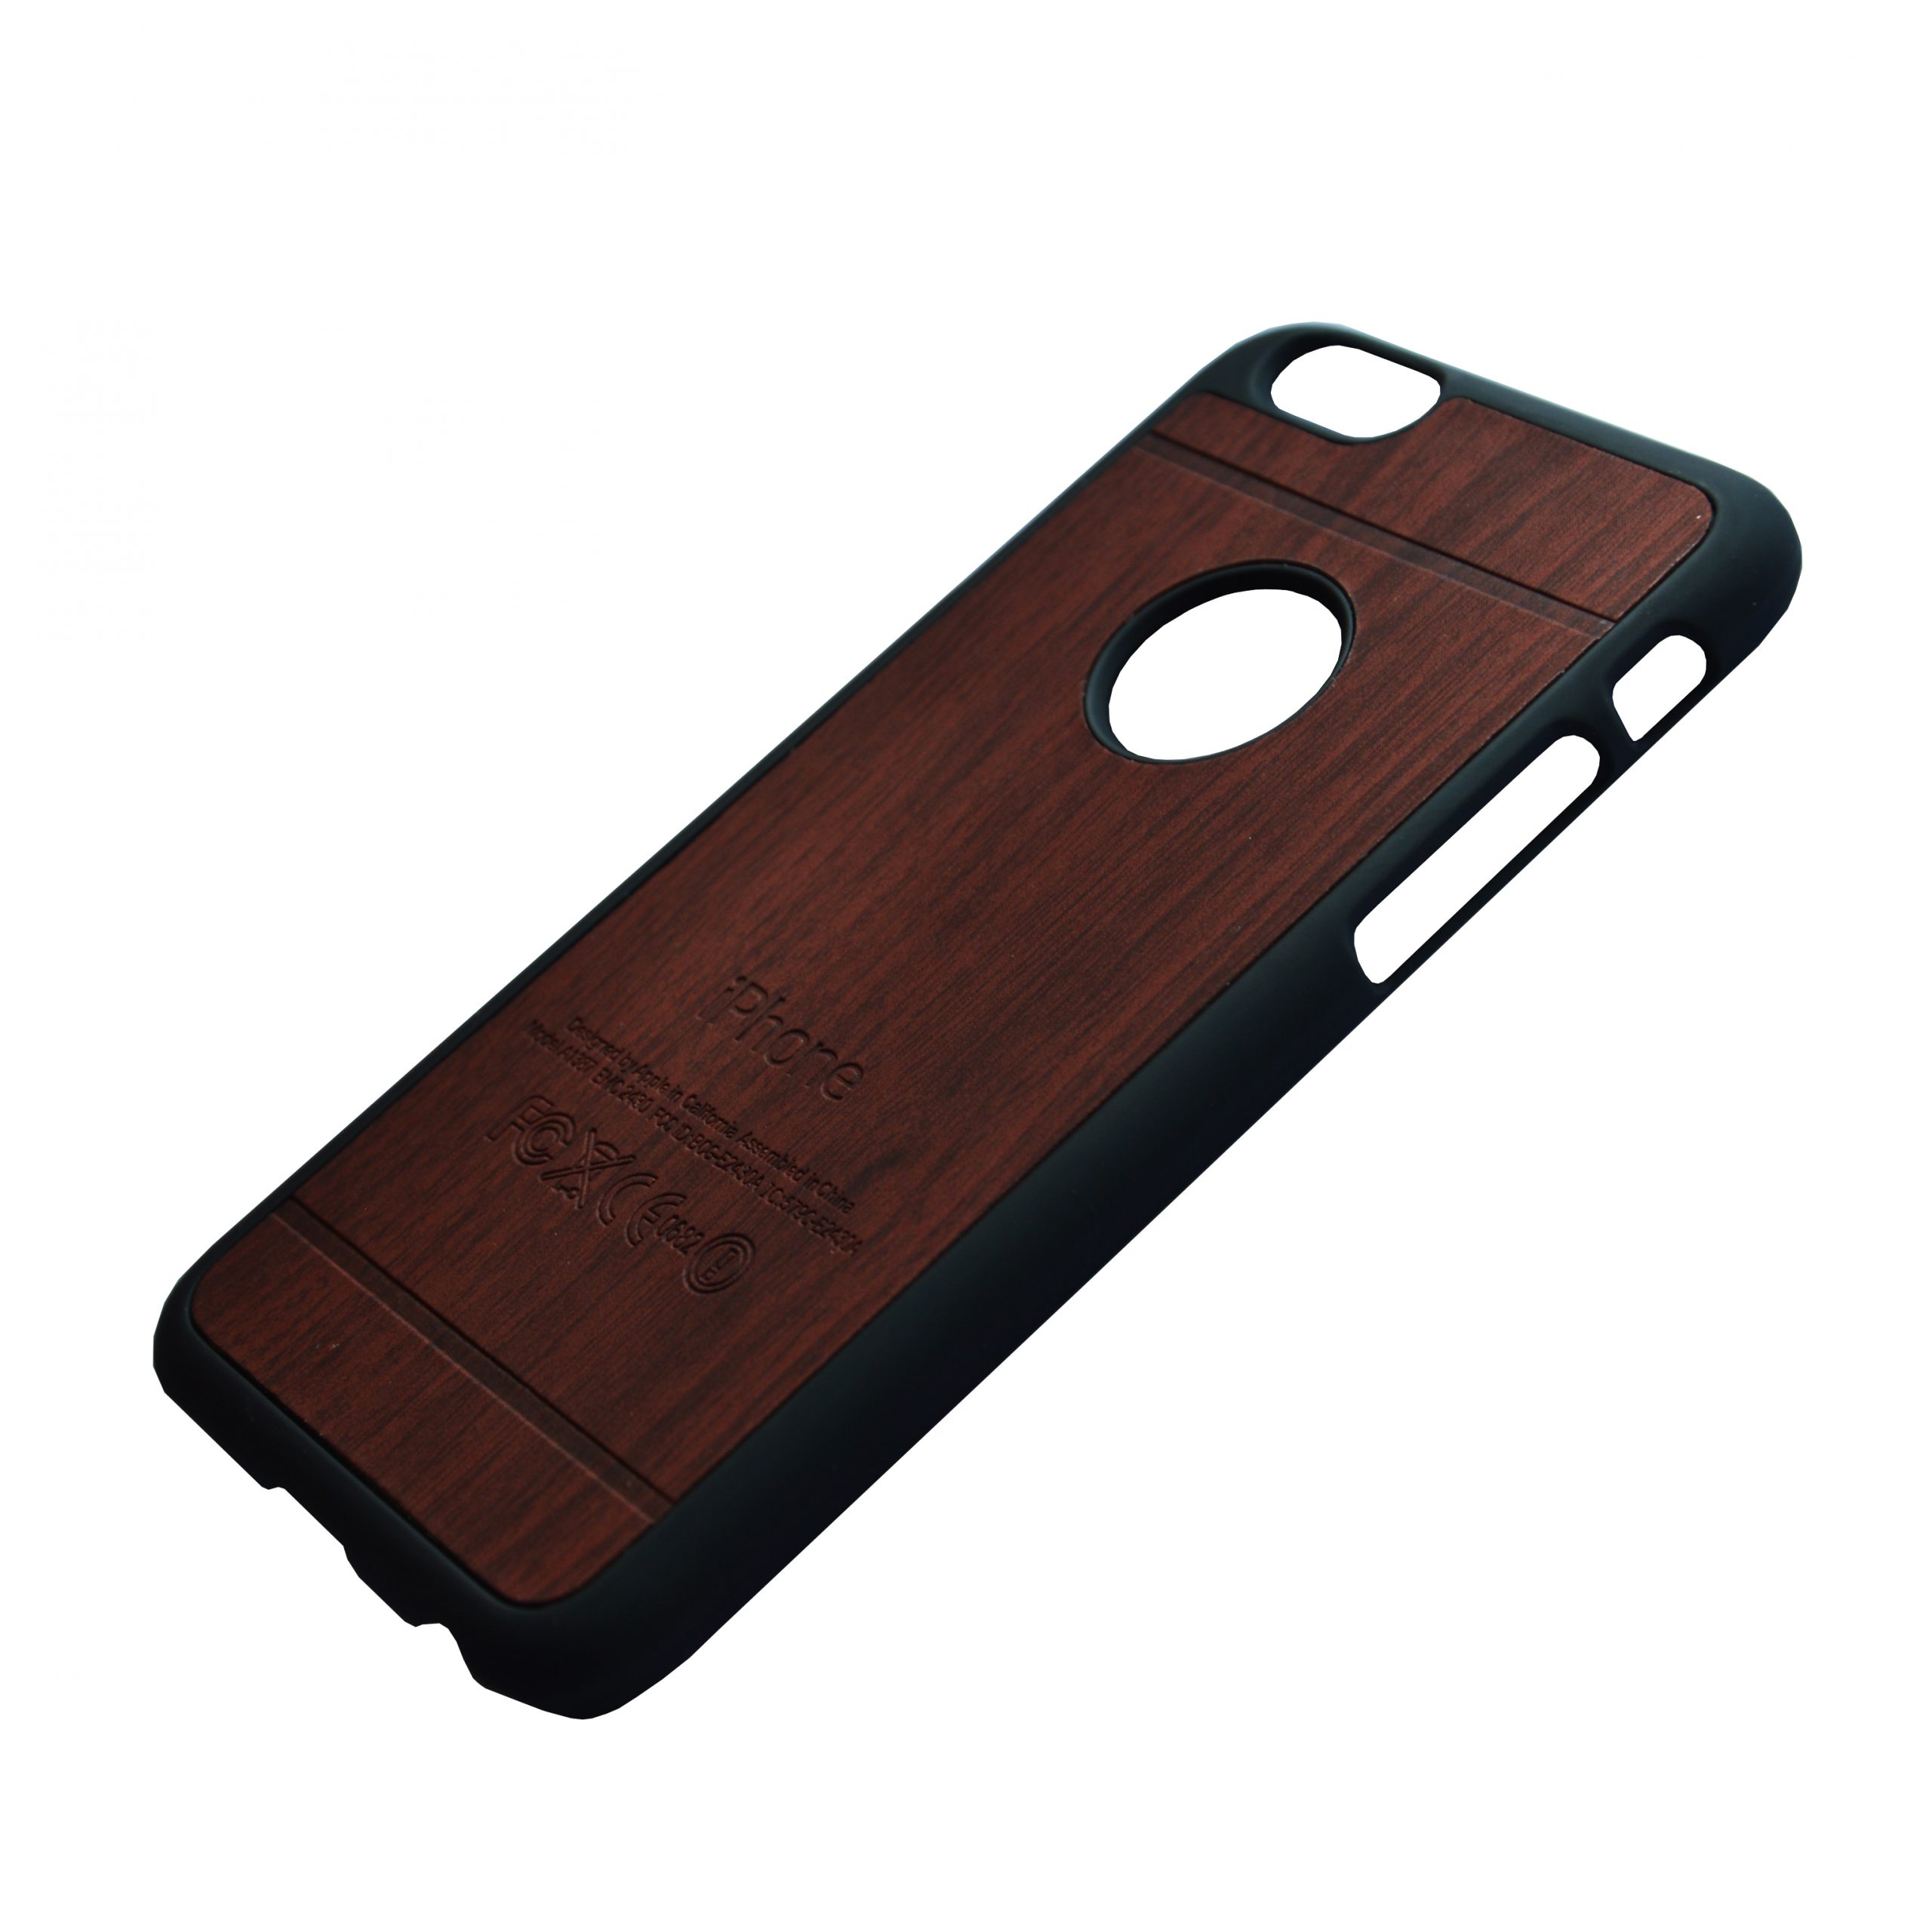 JEP Toestemming Retentie Apple iPhone 6 Luxe hout design hoes Bruinrood - JustXL